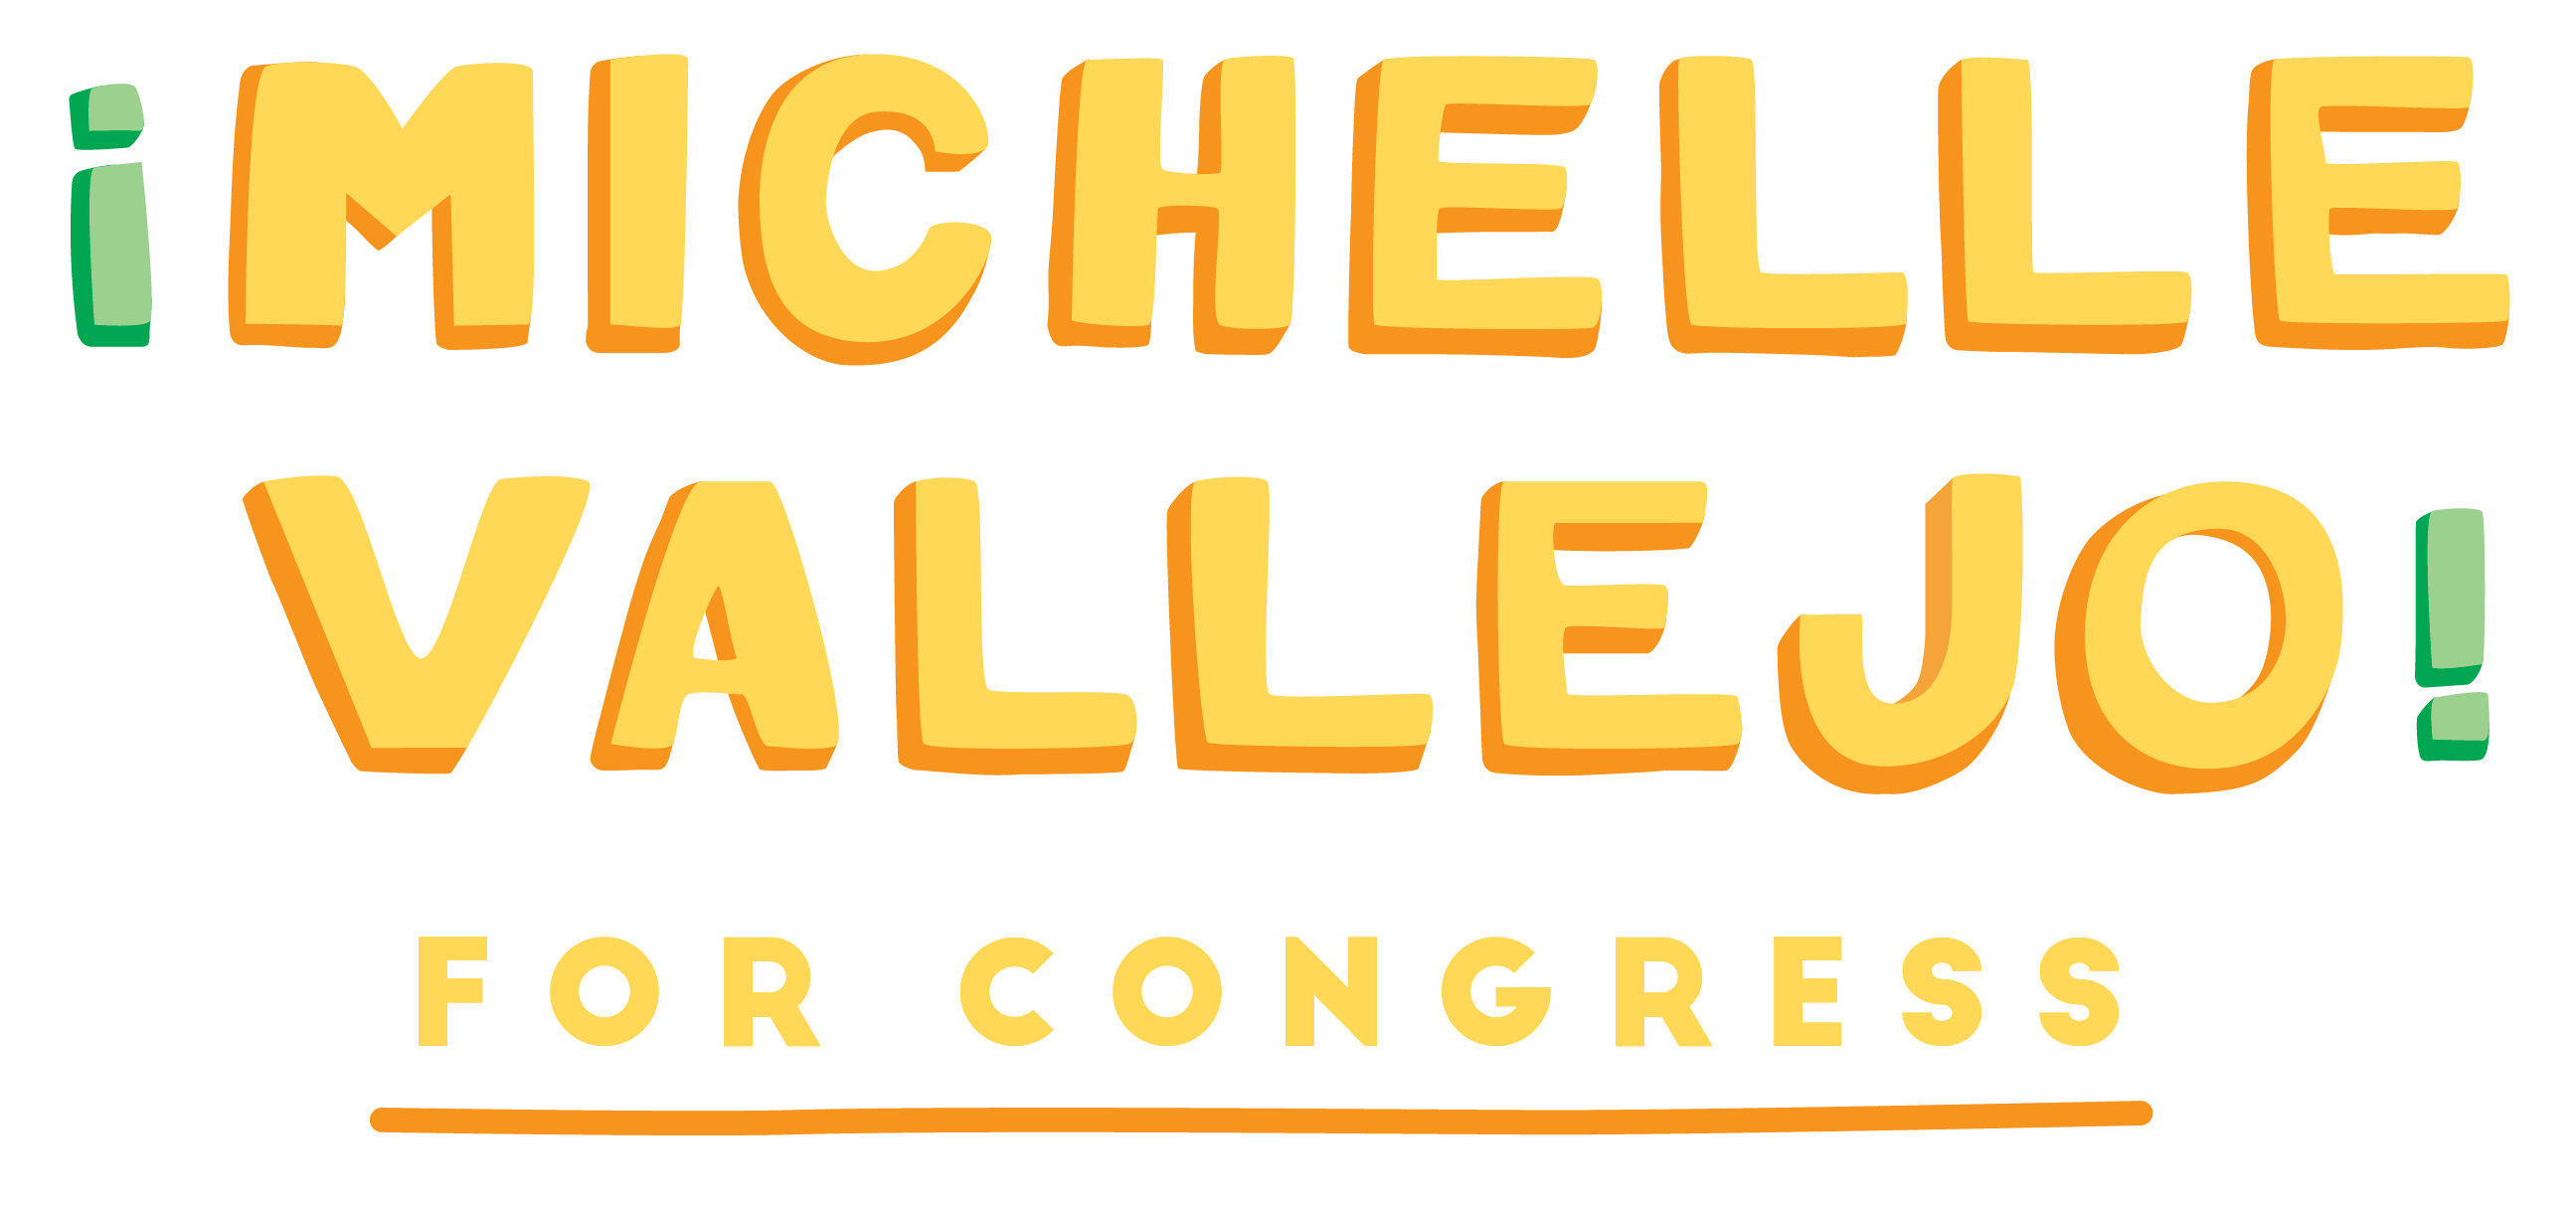 Michelle Valle for Congress